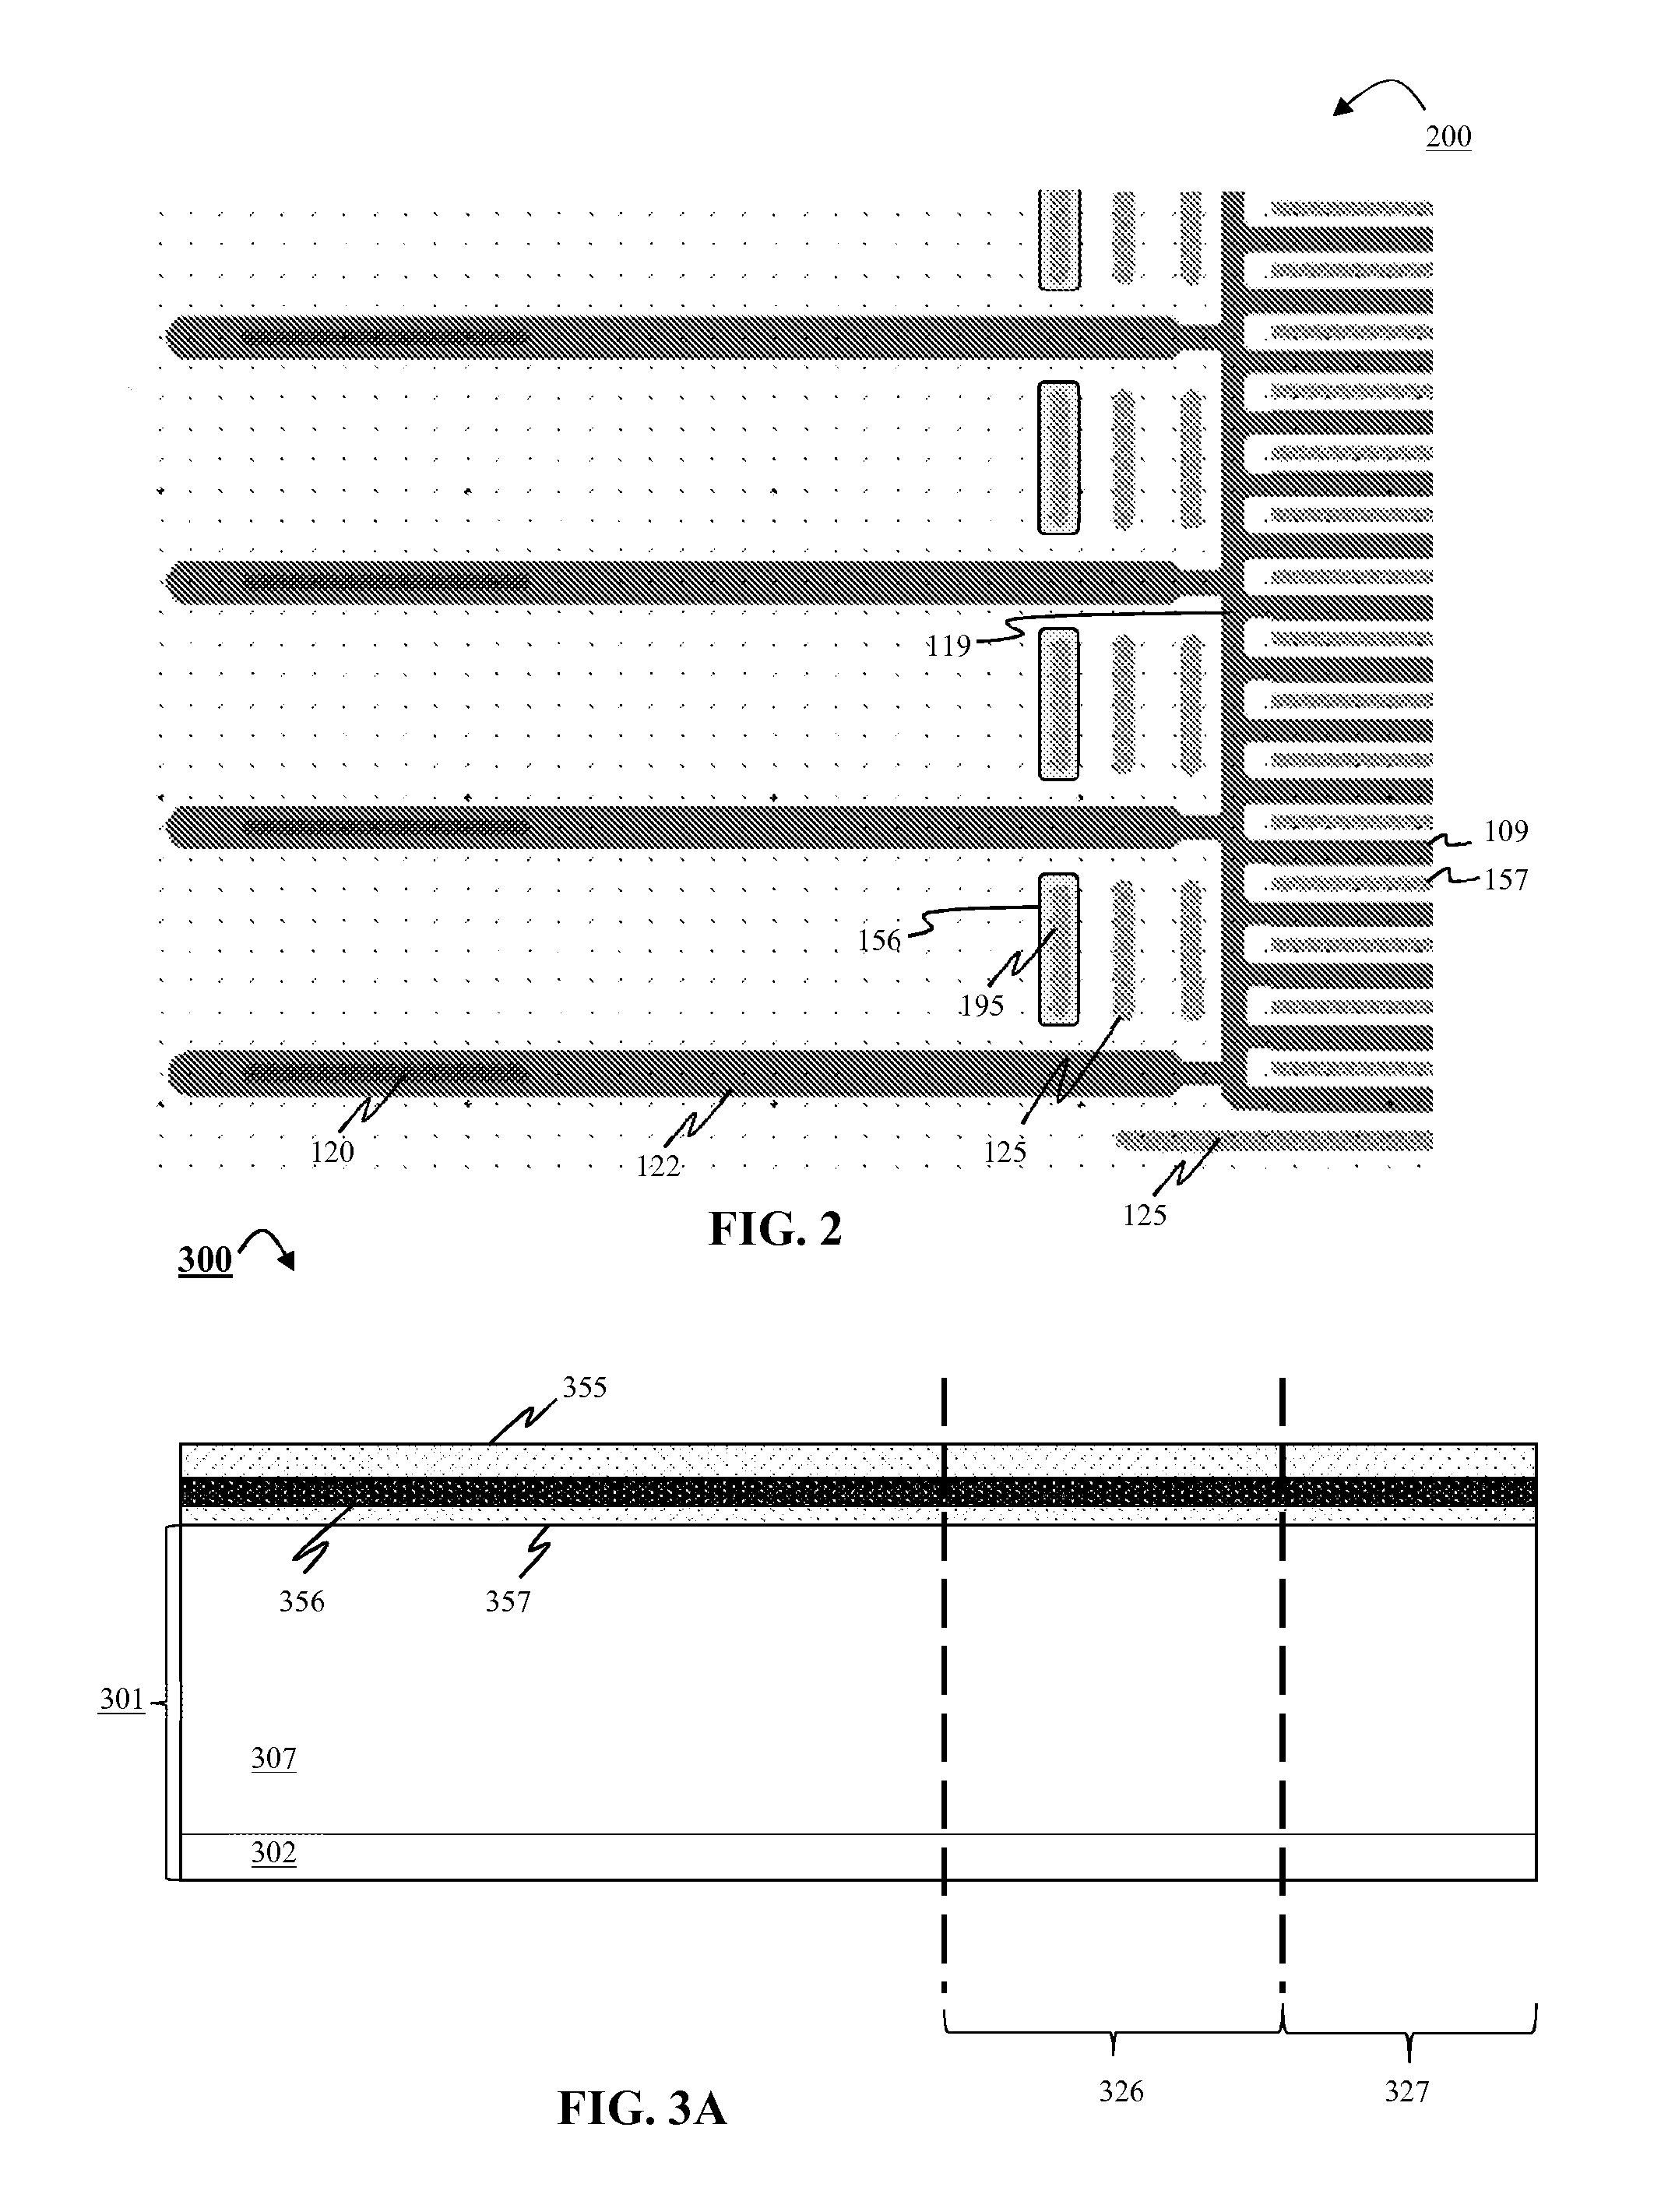 High density trench-based power MOSFETs with self-aligned active contacts and method for making such devices